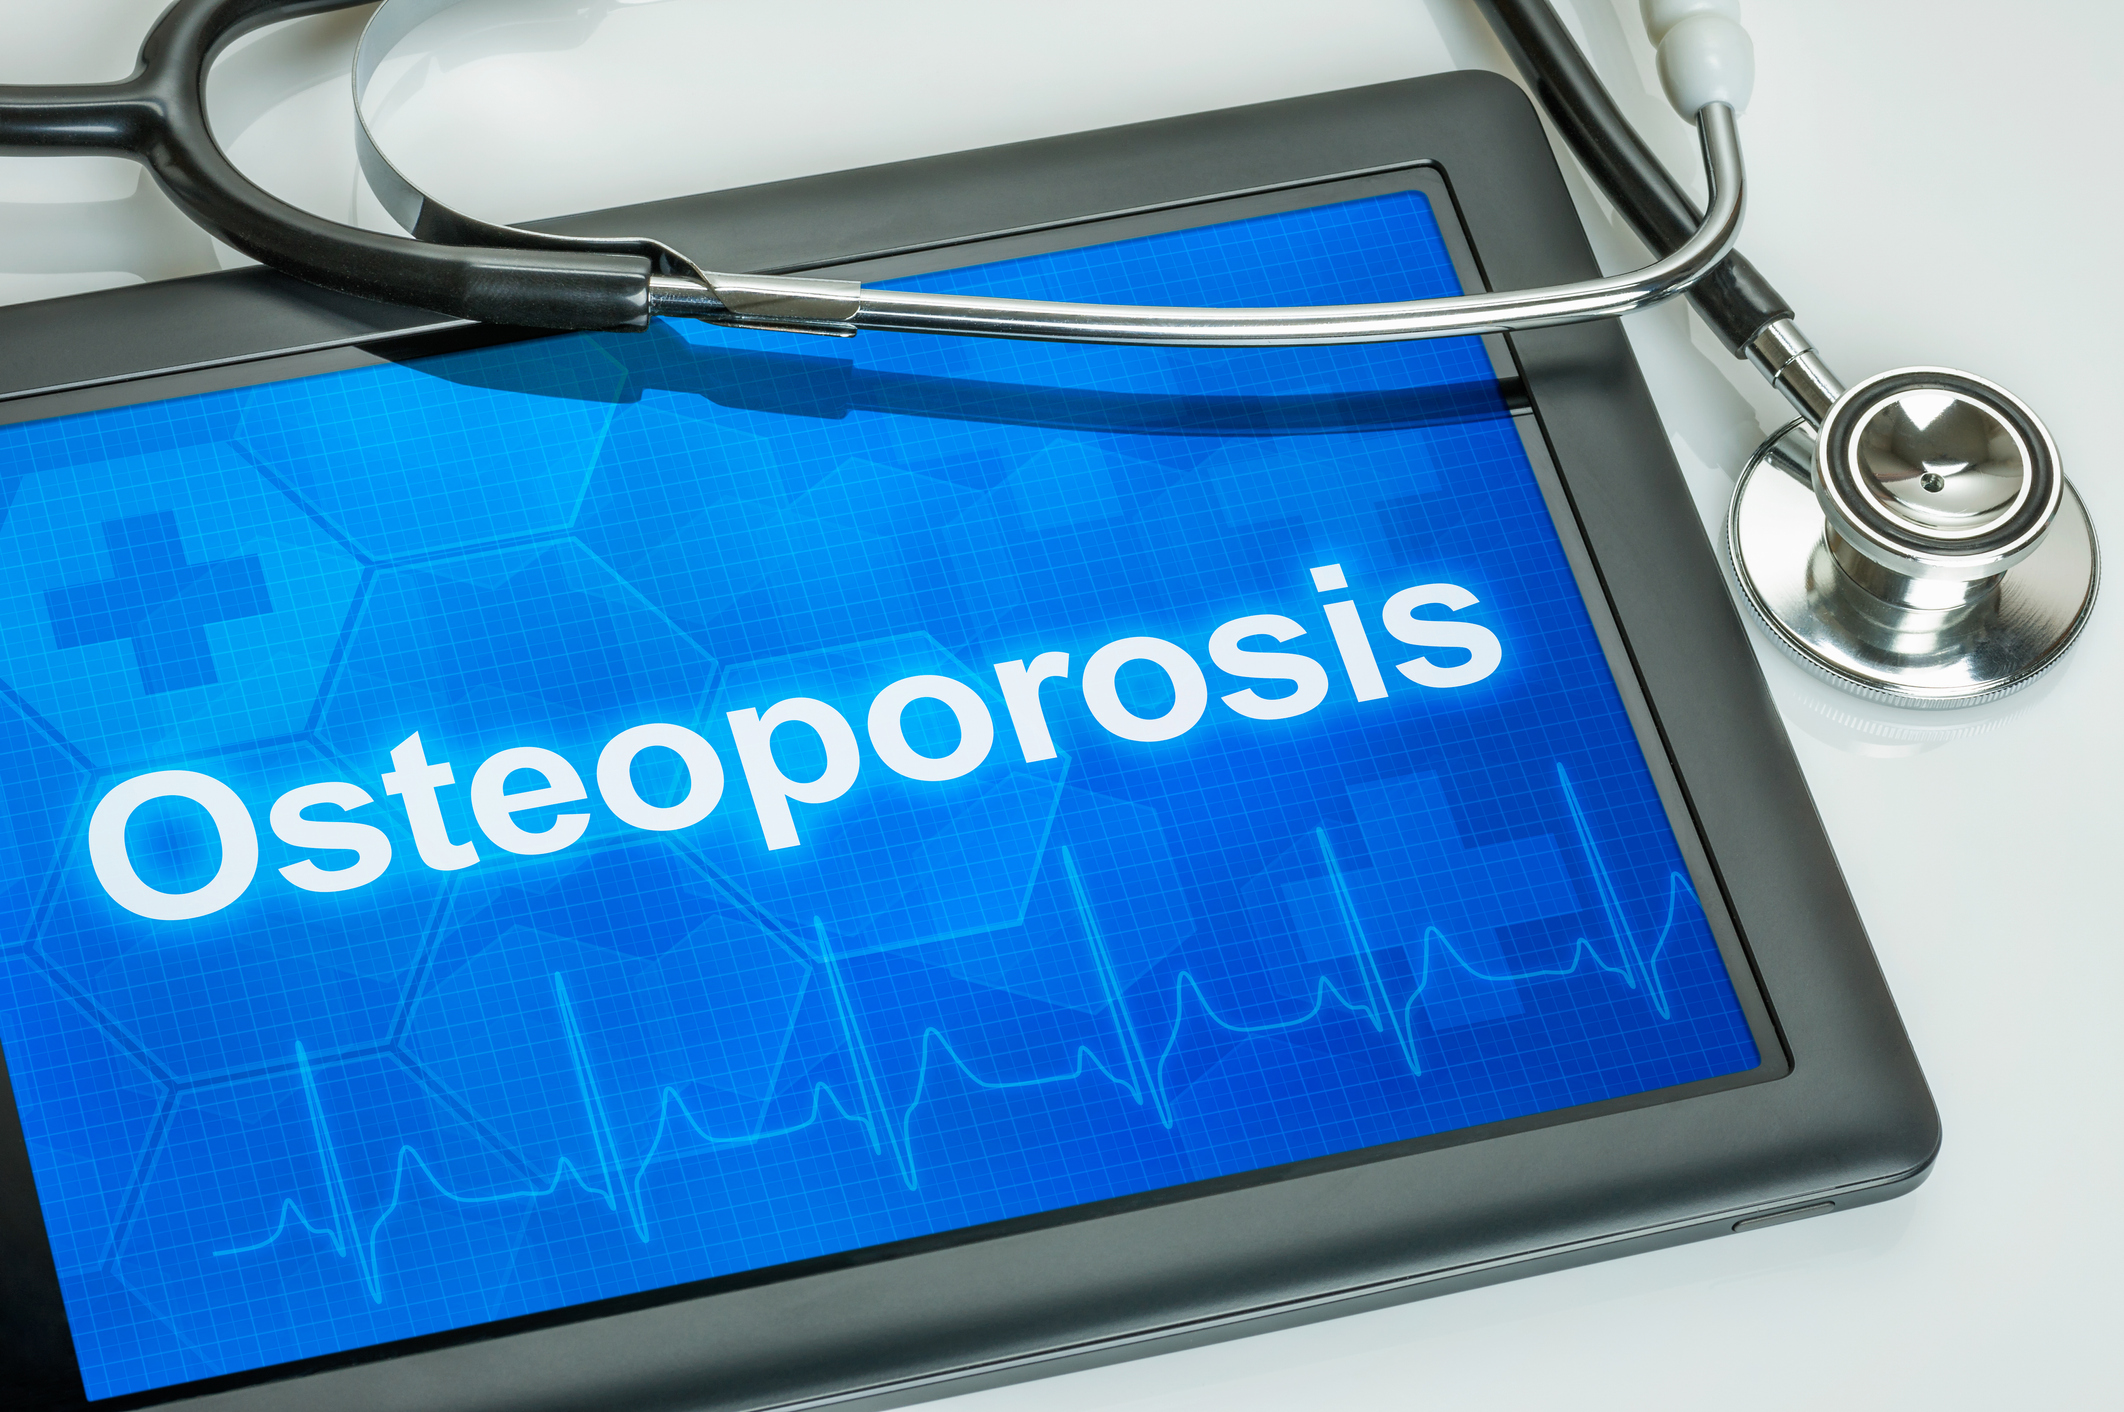 Tablet showing "Osteoporosis"